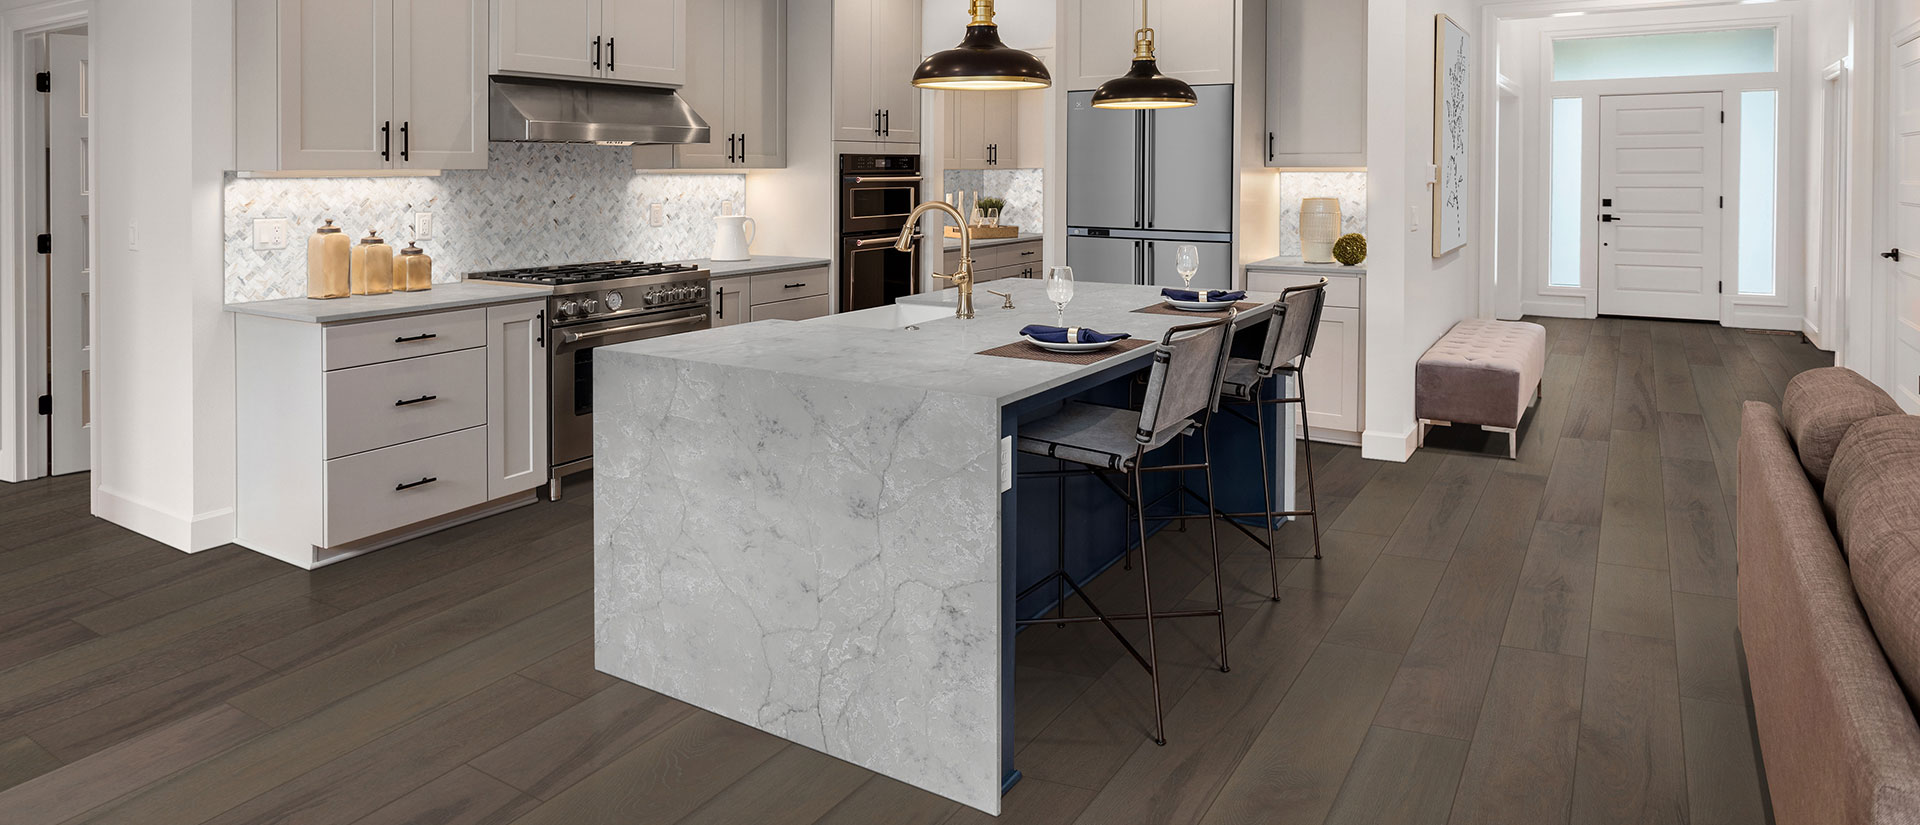 Calacatta Versailles quartz countertop in a contemporary kitchen with wooden cabinets